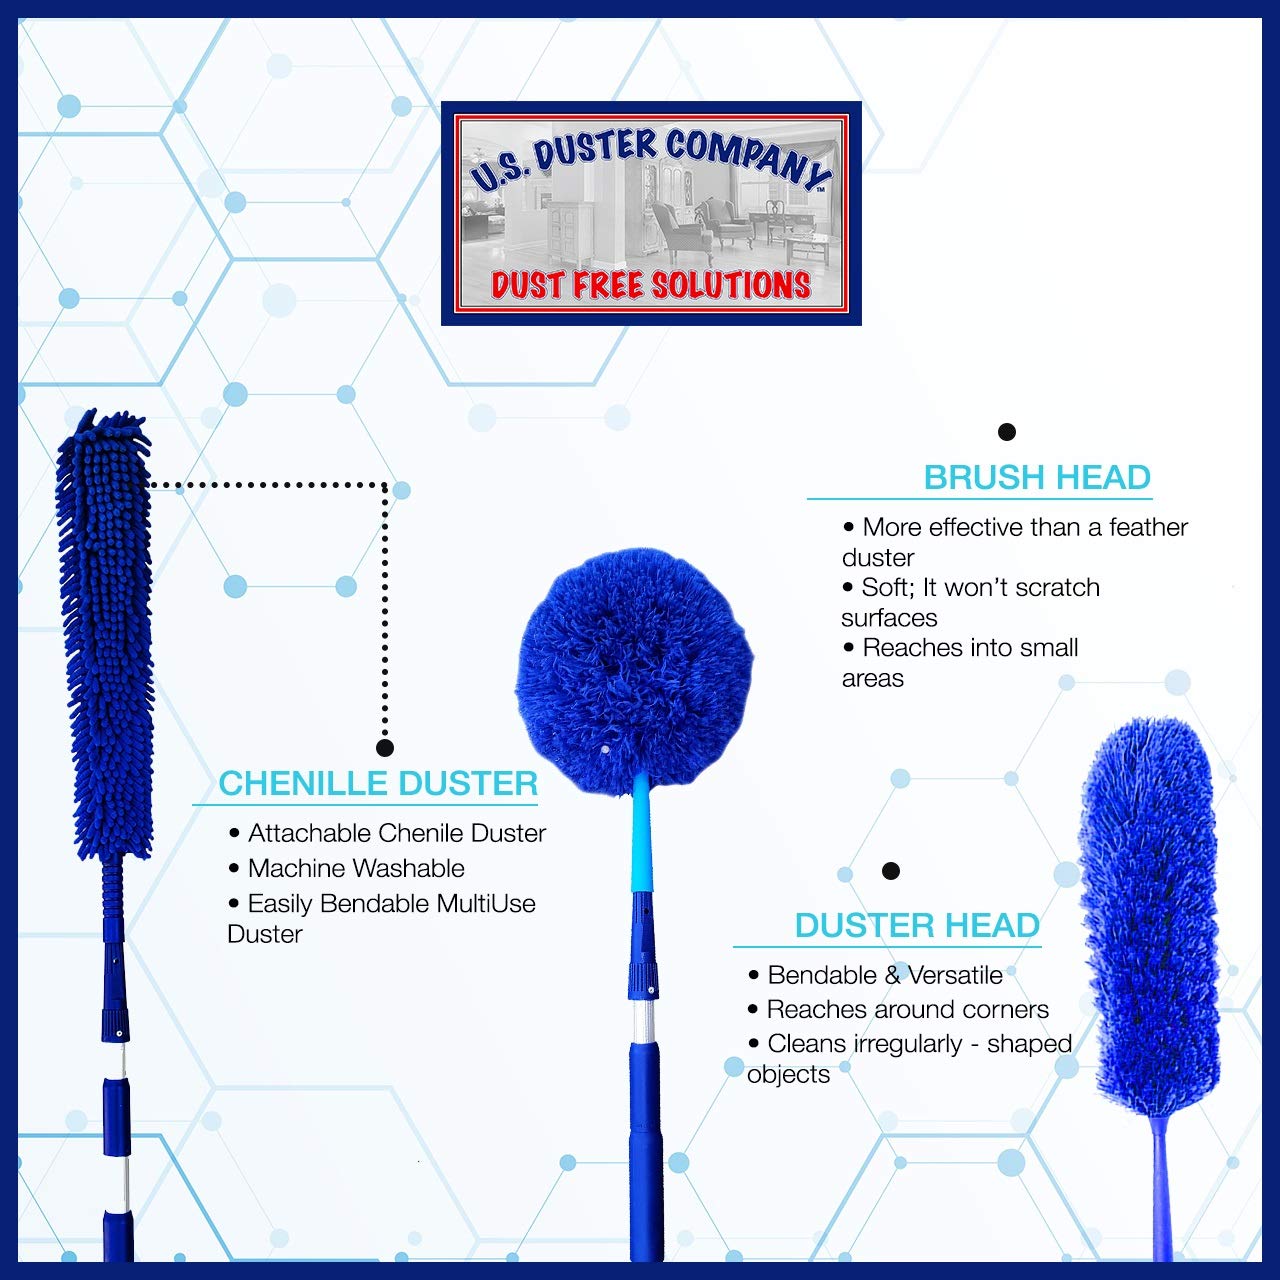 New U.S. Duster Company Triple Action High Reach Dusting Kit | Webster Cobweb Ceiling Fan Duster with 13 to 20 Foot Extension Telescope Pole | Lightweight Microfiber Cleaning Set…